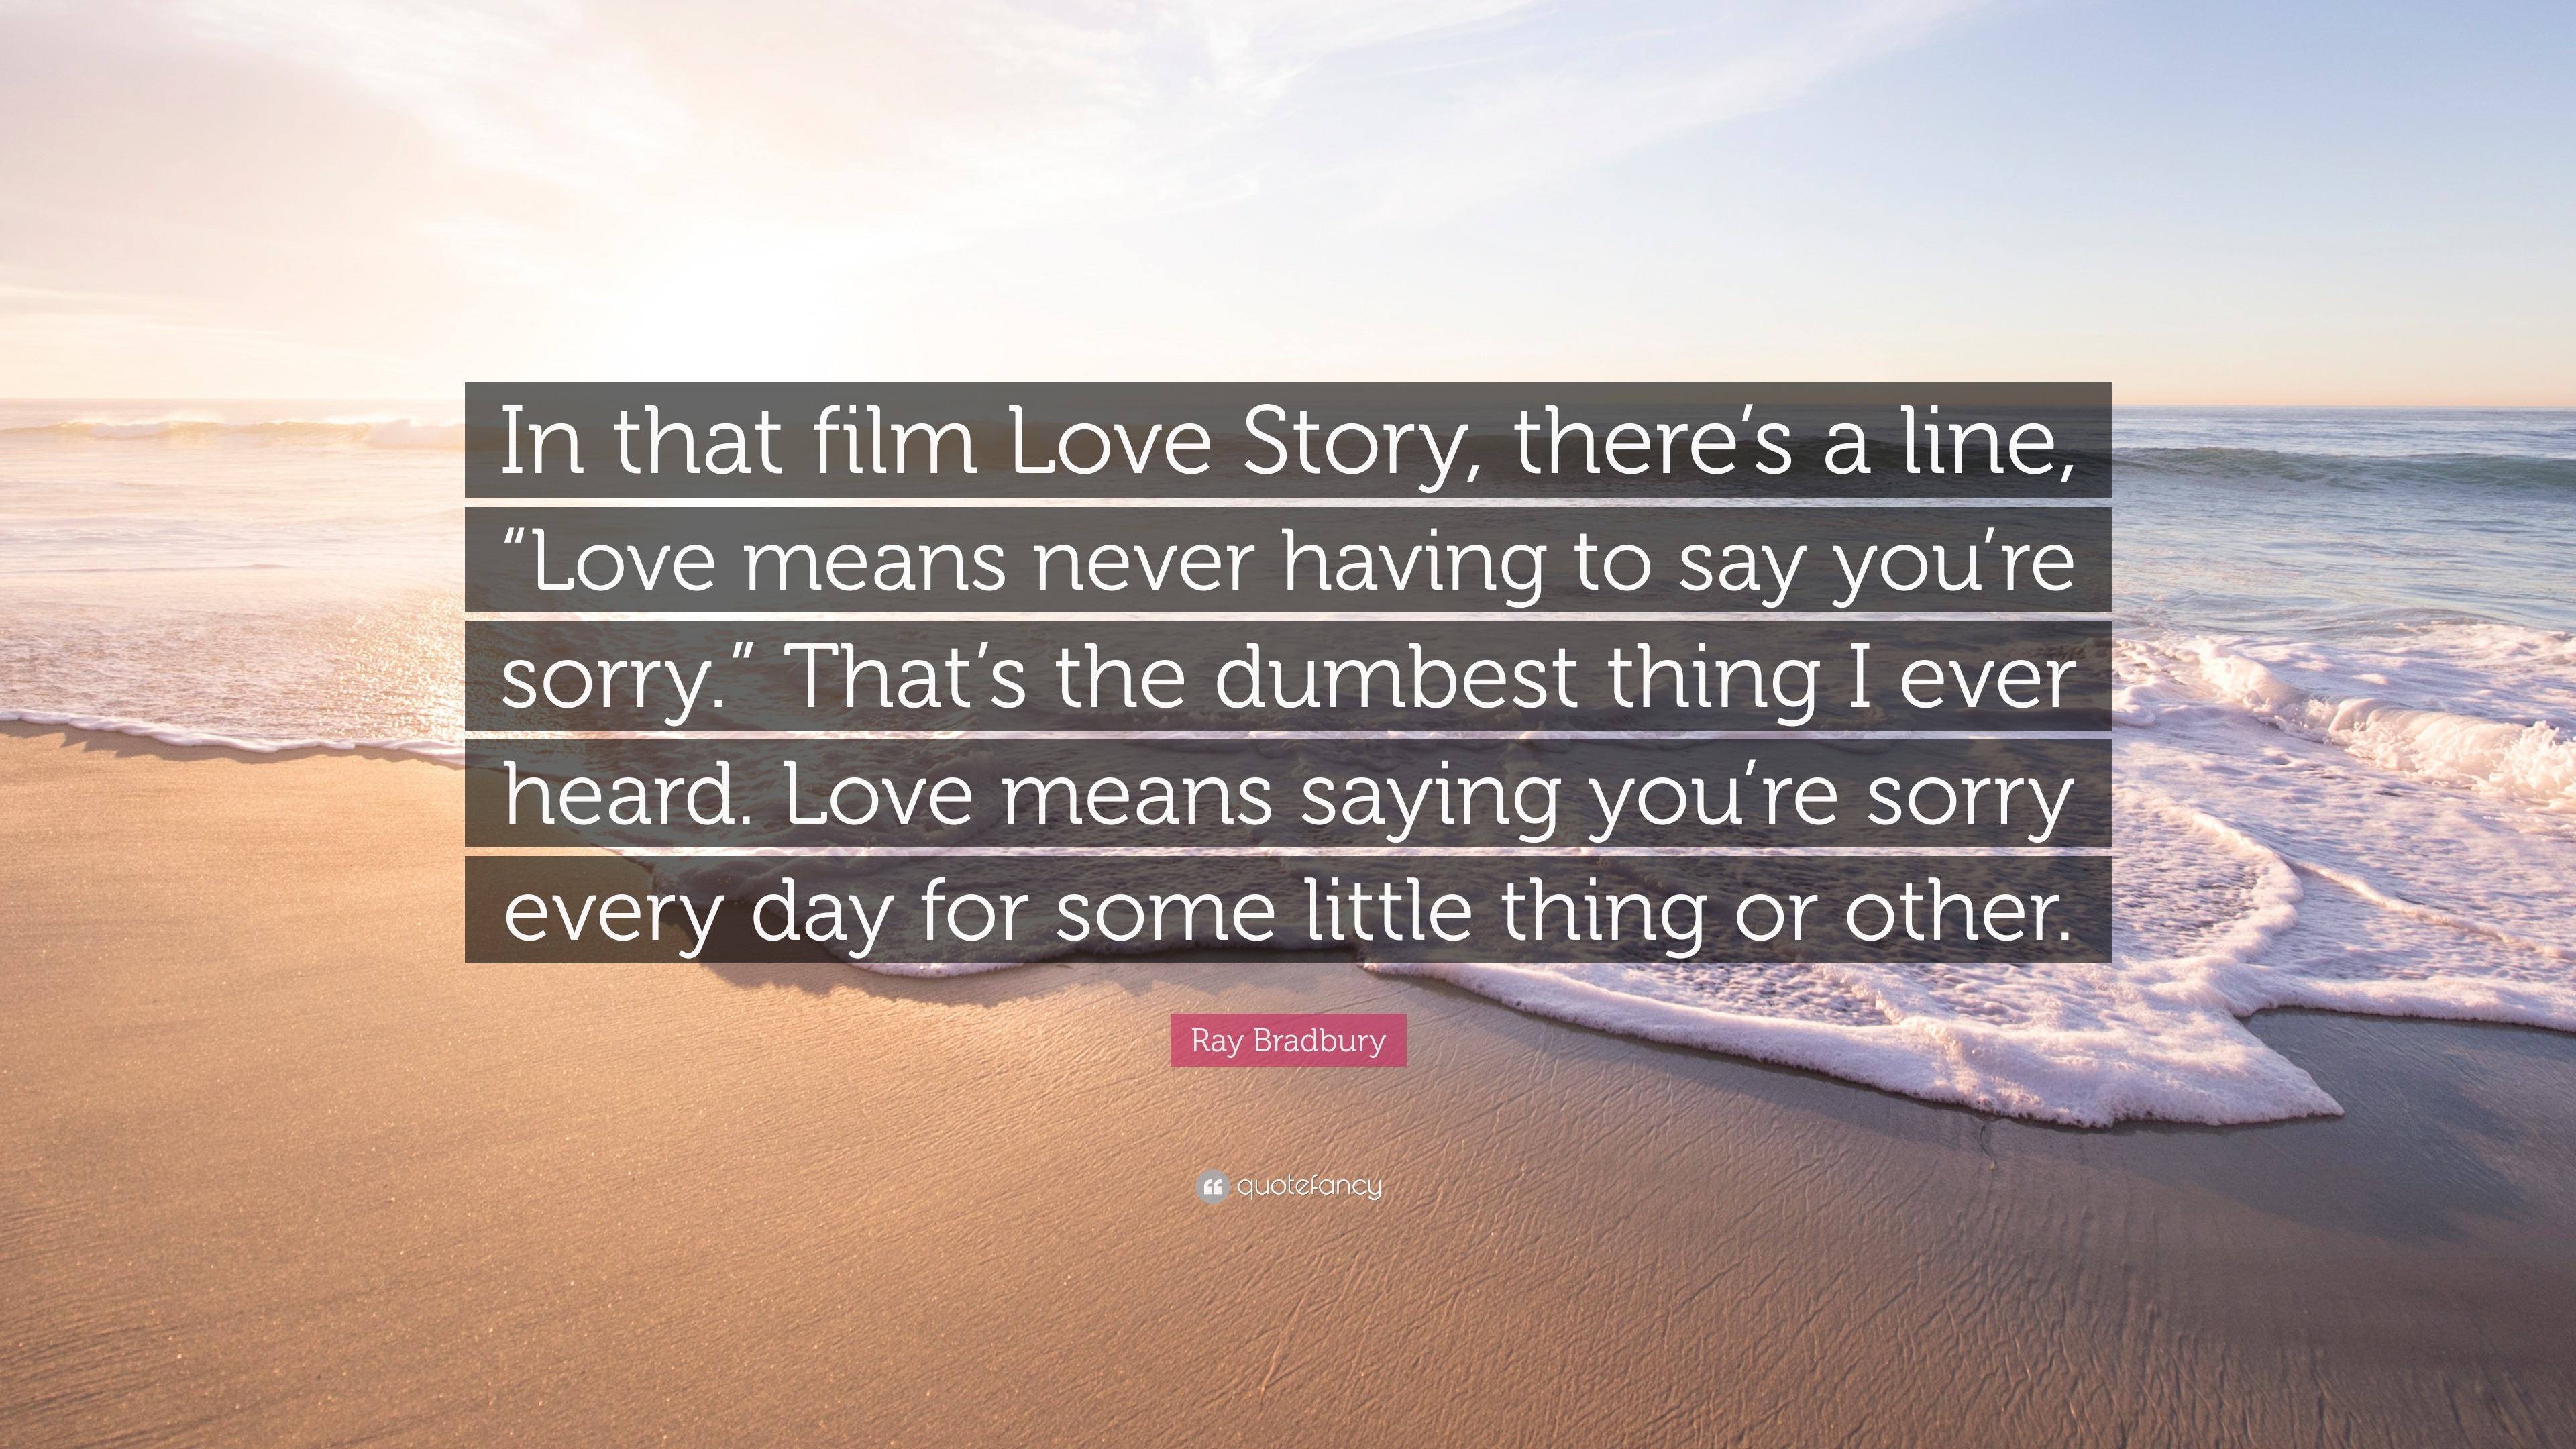 Ray Bradbury Quote “In that film Love Story there s a line “